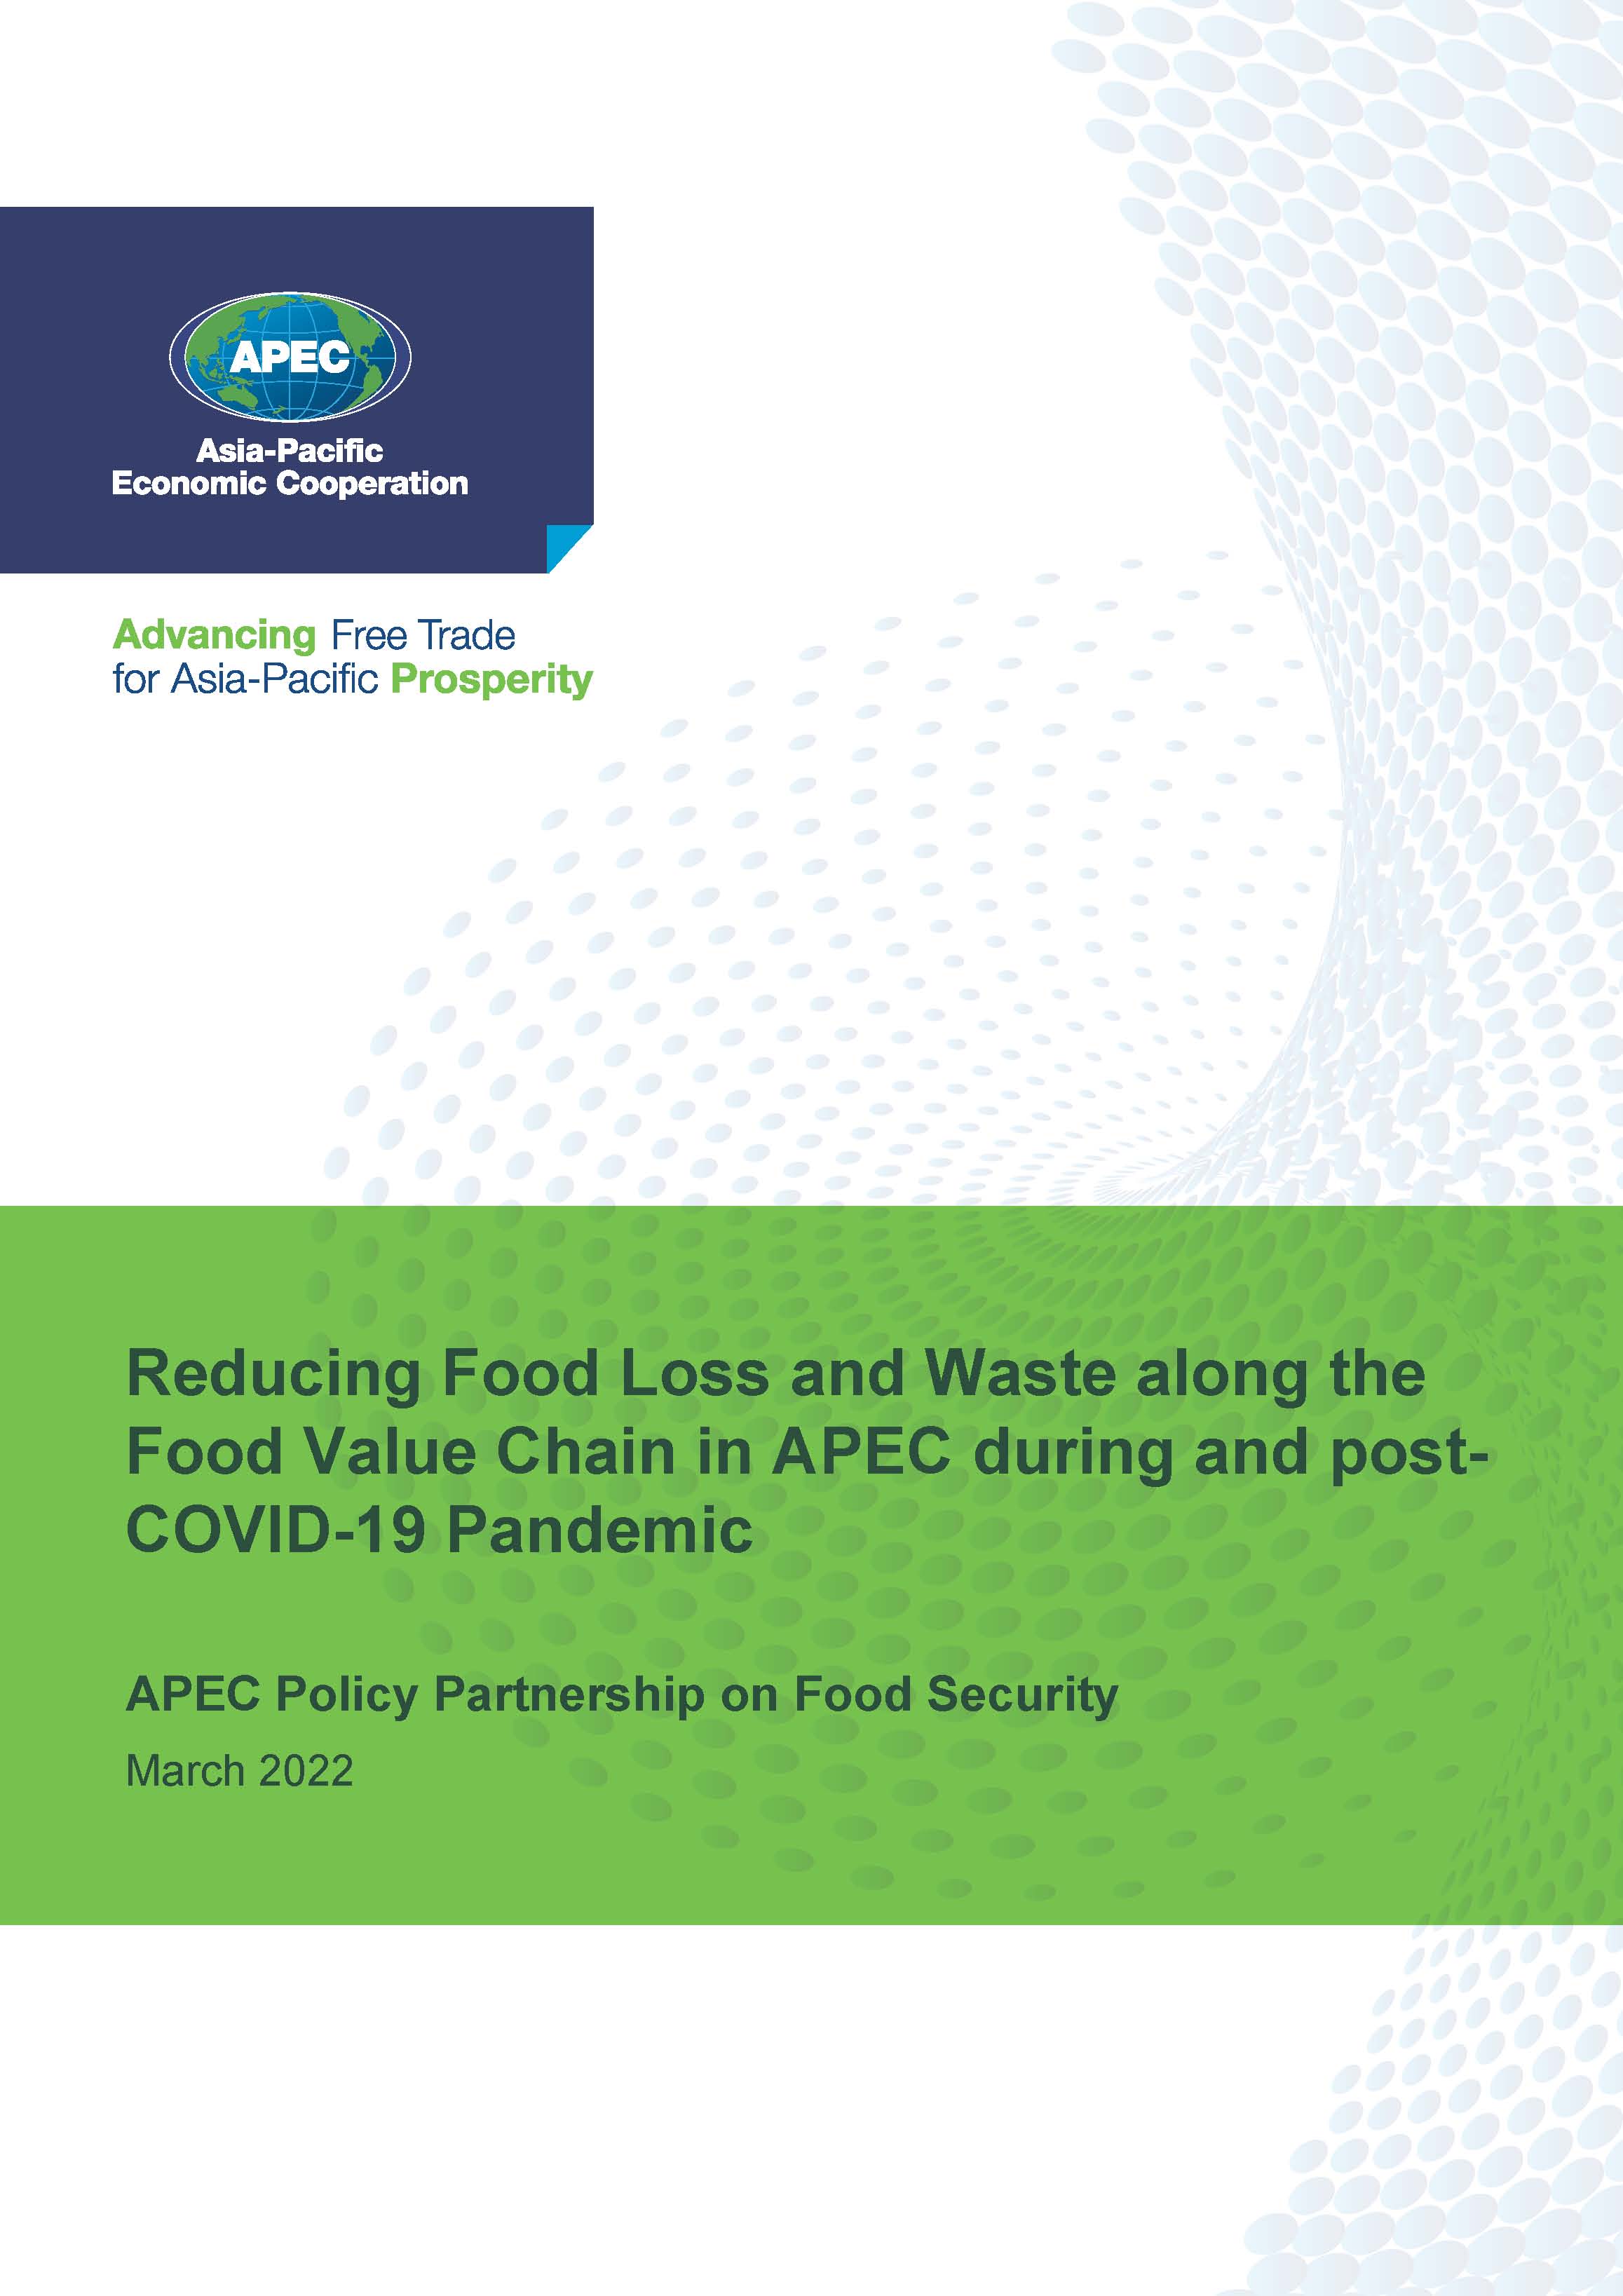 Reducing Food Loss and Waste along the Food Value Chain in APEC during and post-COVID-19 Pandemic（2022）